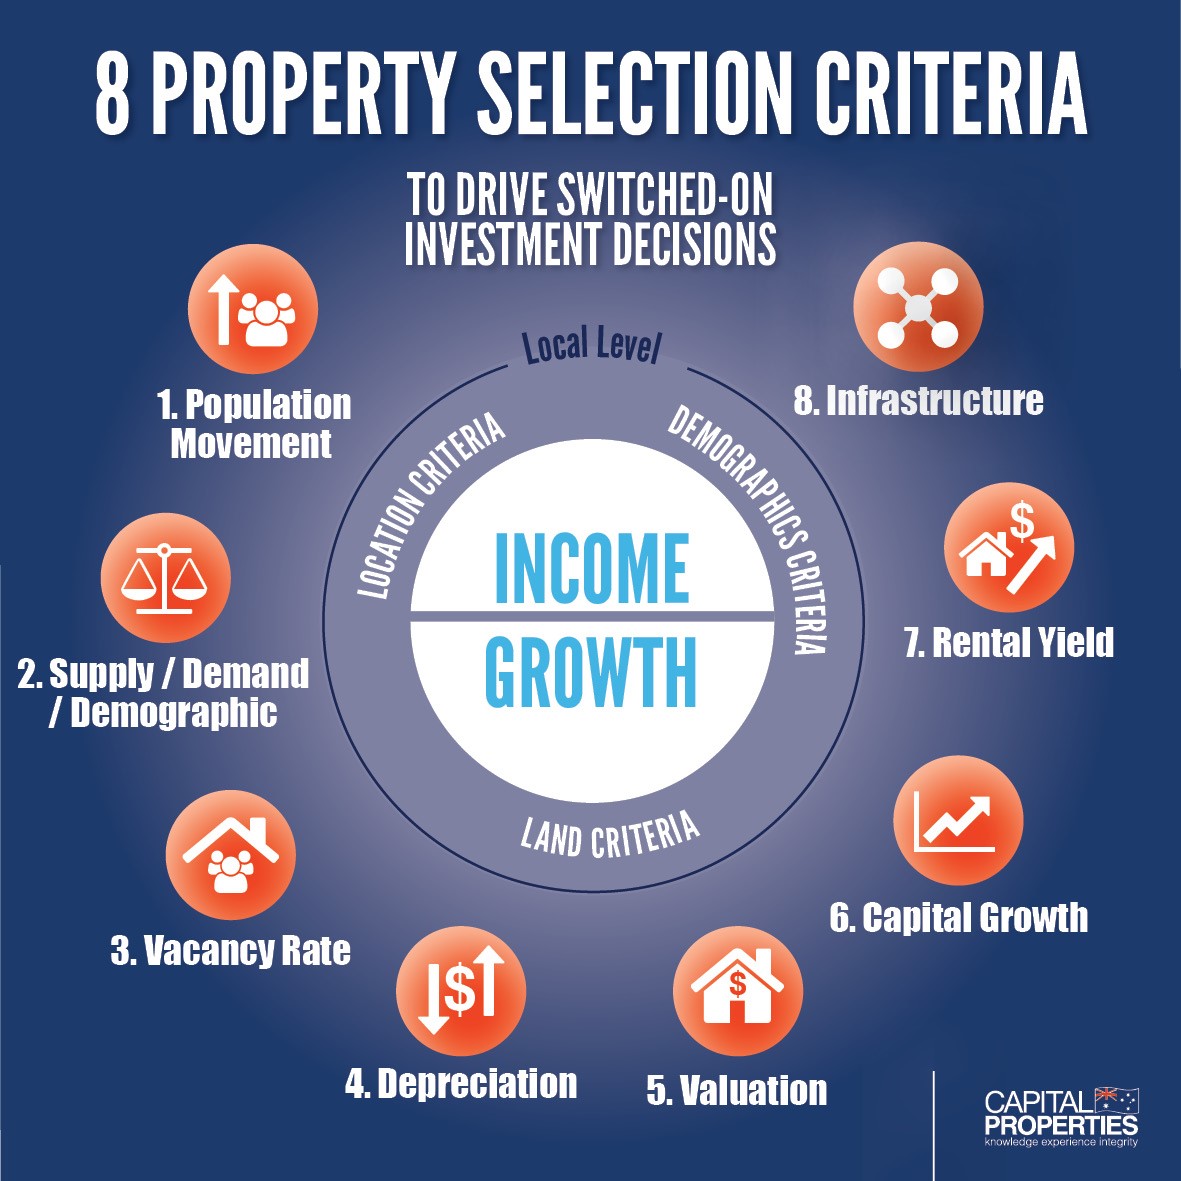 Local Area Property Investment Selection Criteria